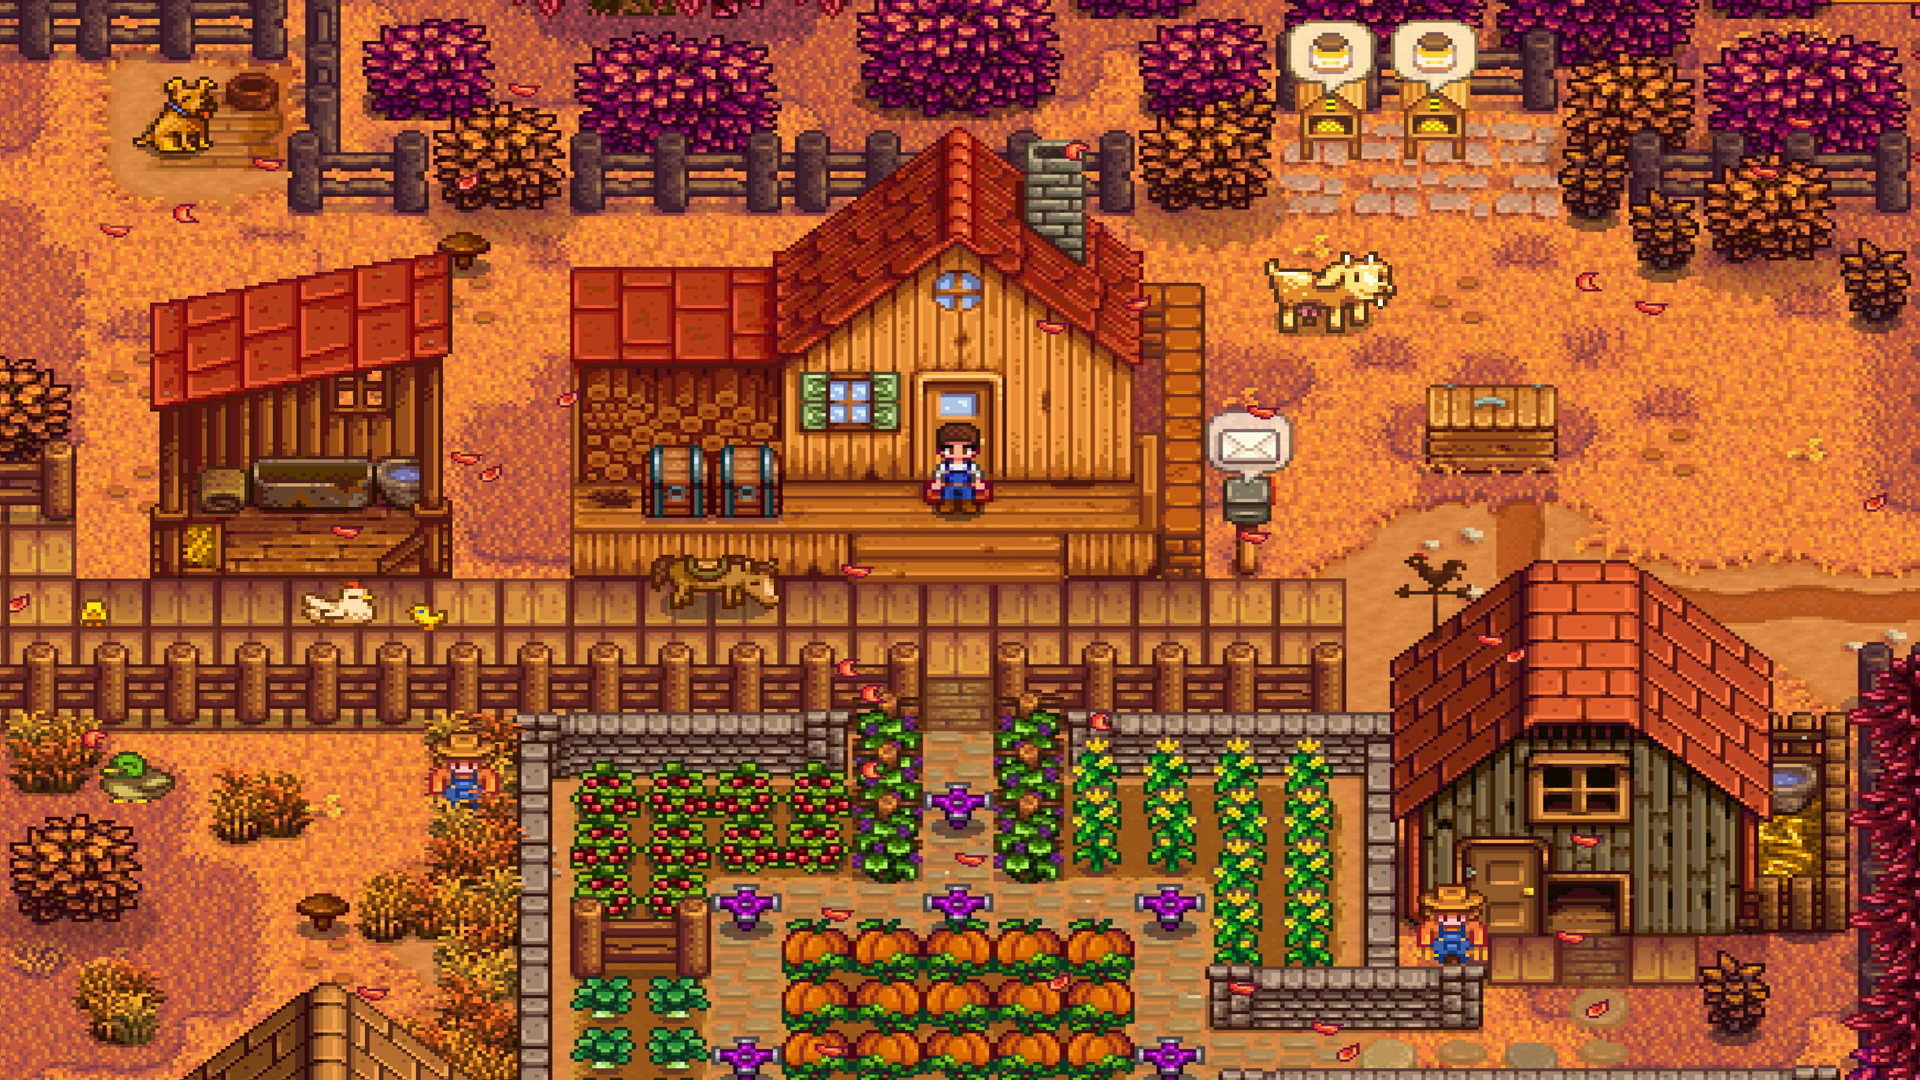  Stardew Valley has sold 30 million copies, and its creator says it's thriving more than ever 